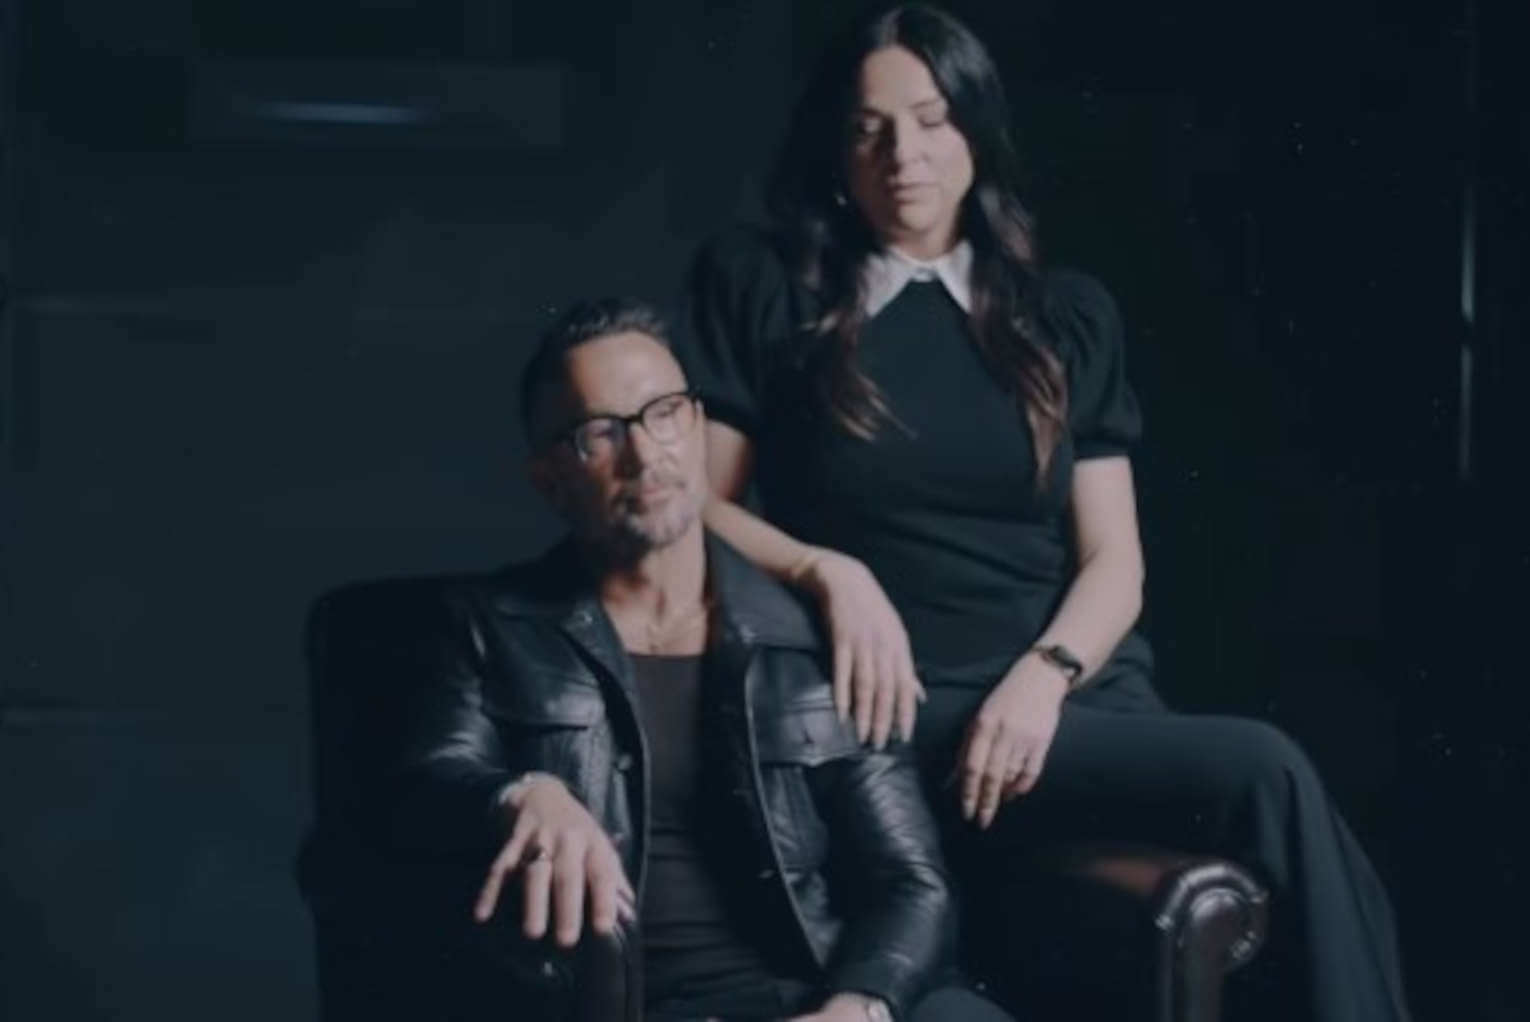 Carl Lentz Launches New Project Amid Rumors of Returning to Ministry